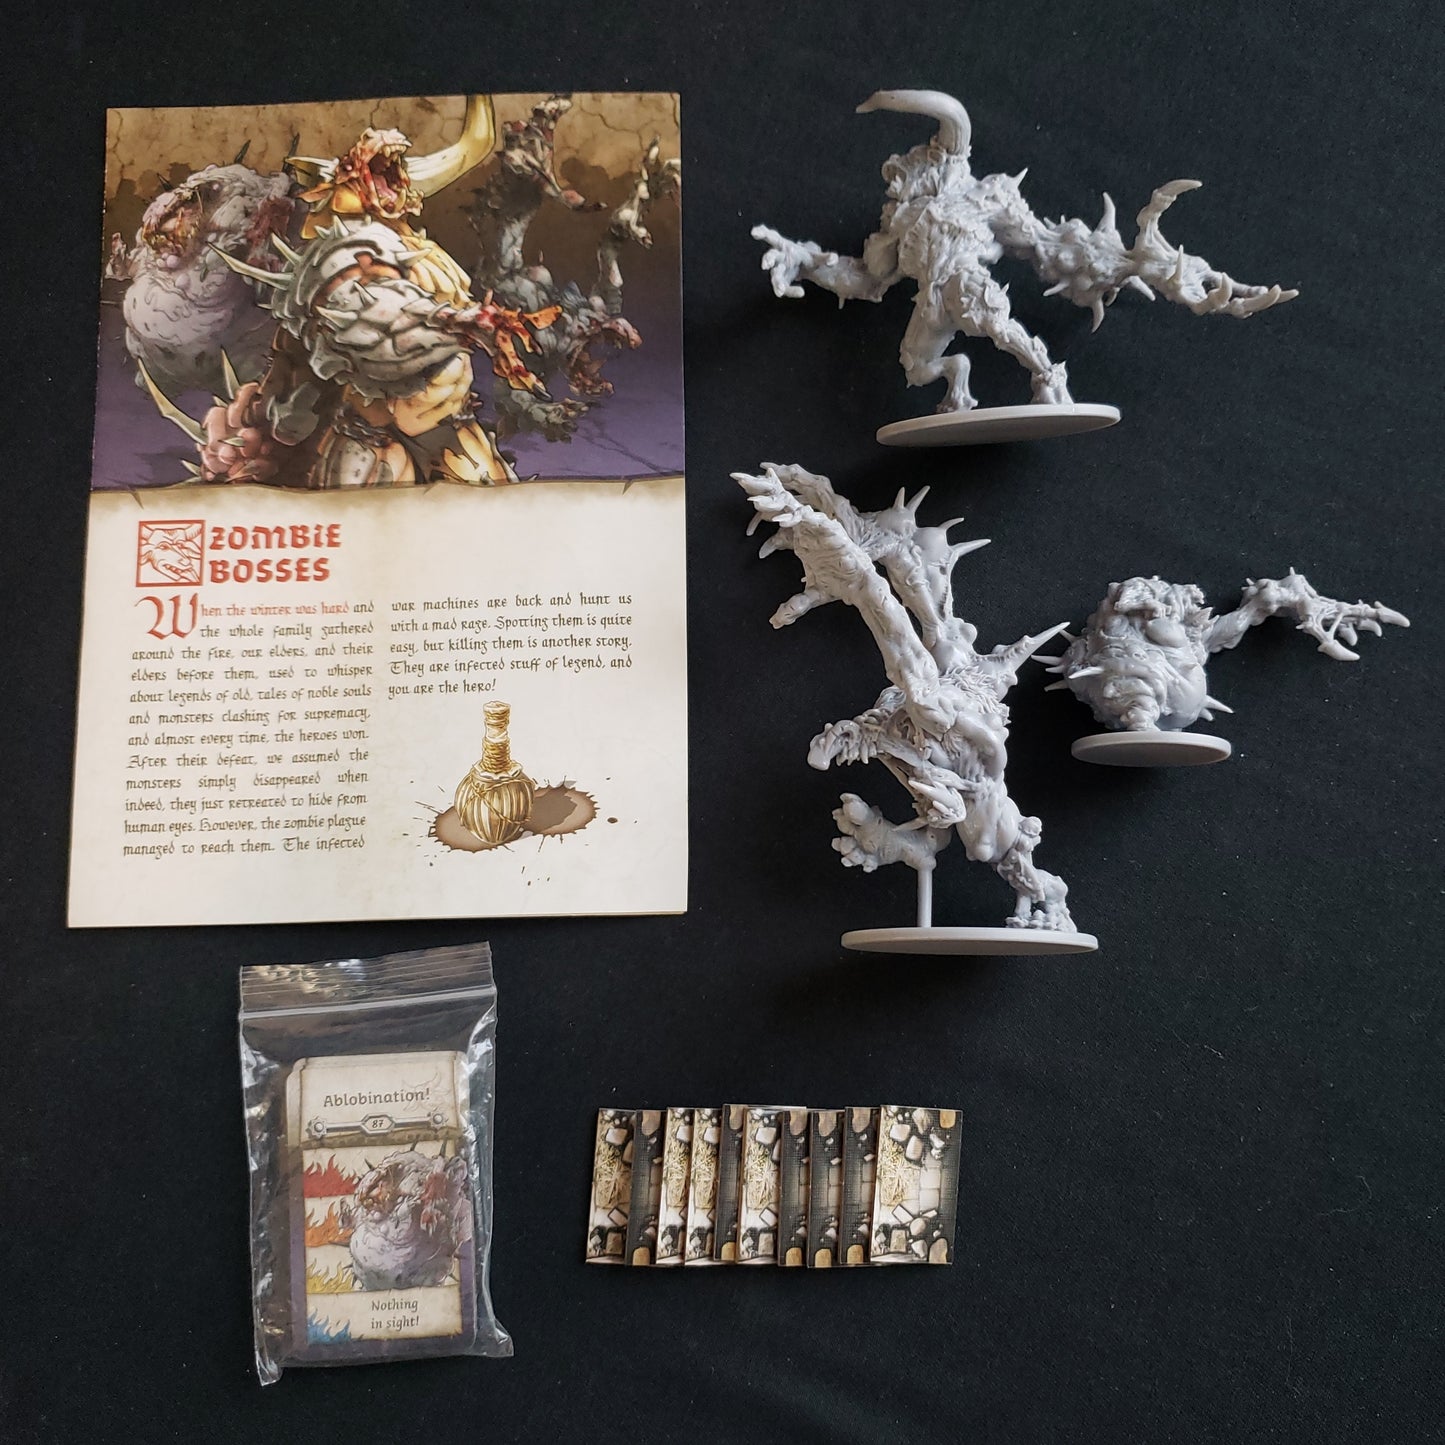 Image shows the instructions, miniatures and cards for the Zombie Bosses Abomination Pack for the board game Zombicide: Black Plague